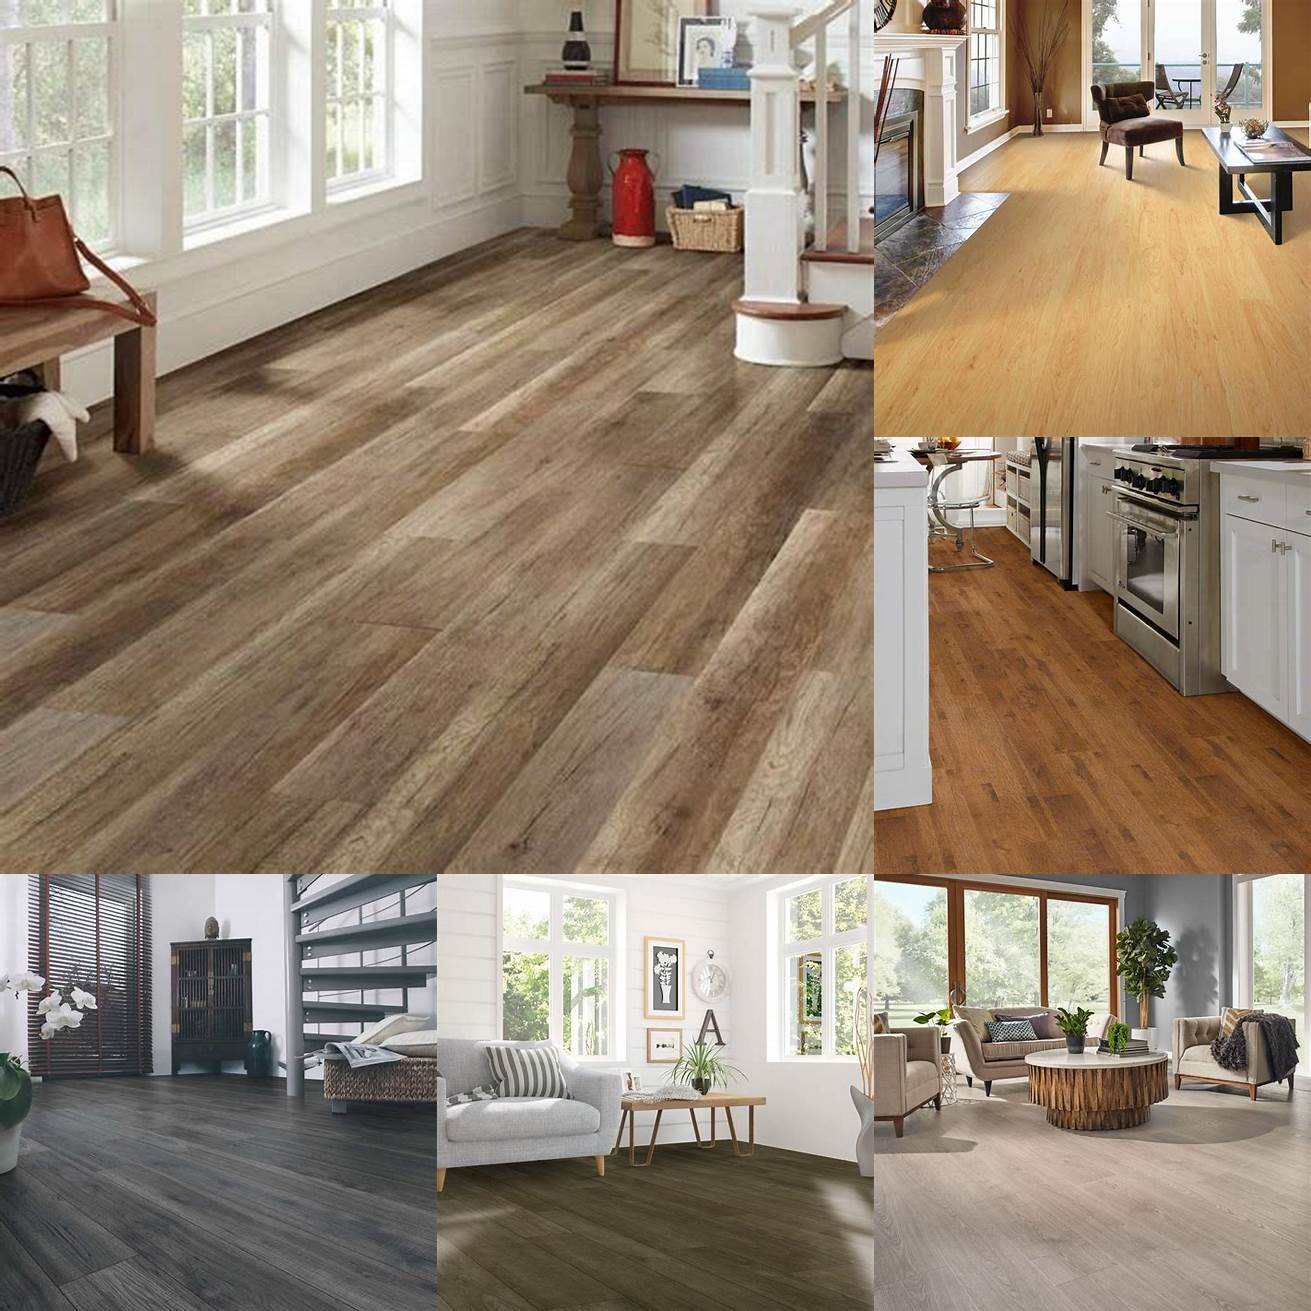 Laminate This is a more affordable option that comes in a variety of colors and styles